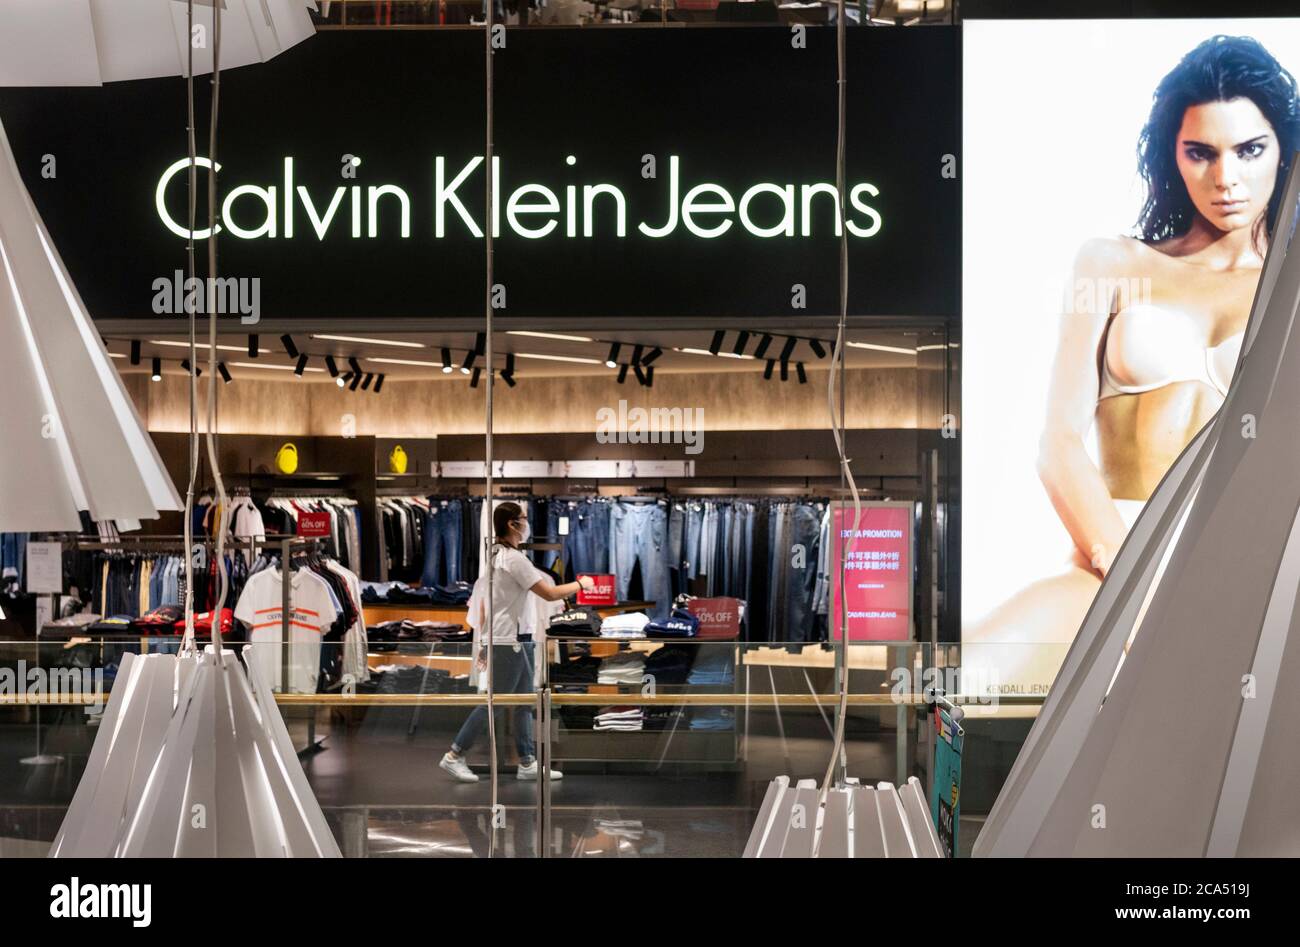 Calvin Klein Jeans High Resolution Stock Photography and Images - Alamy